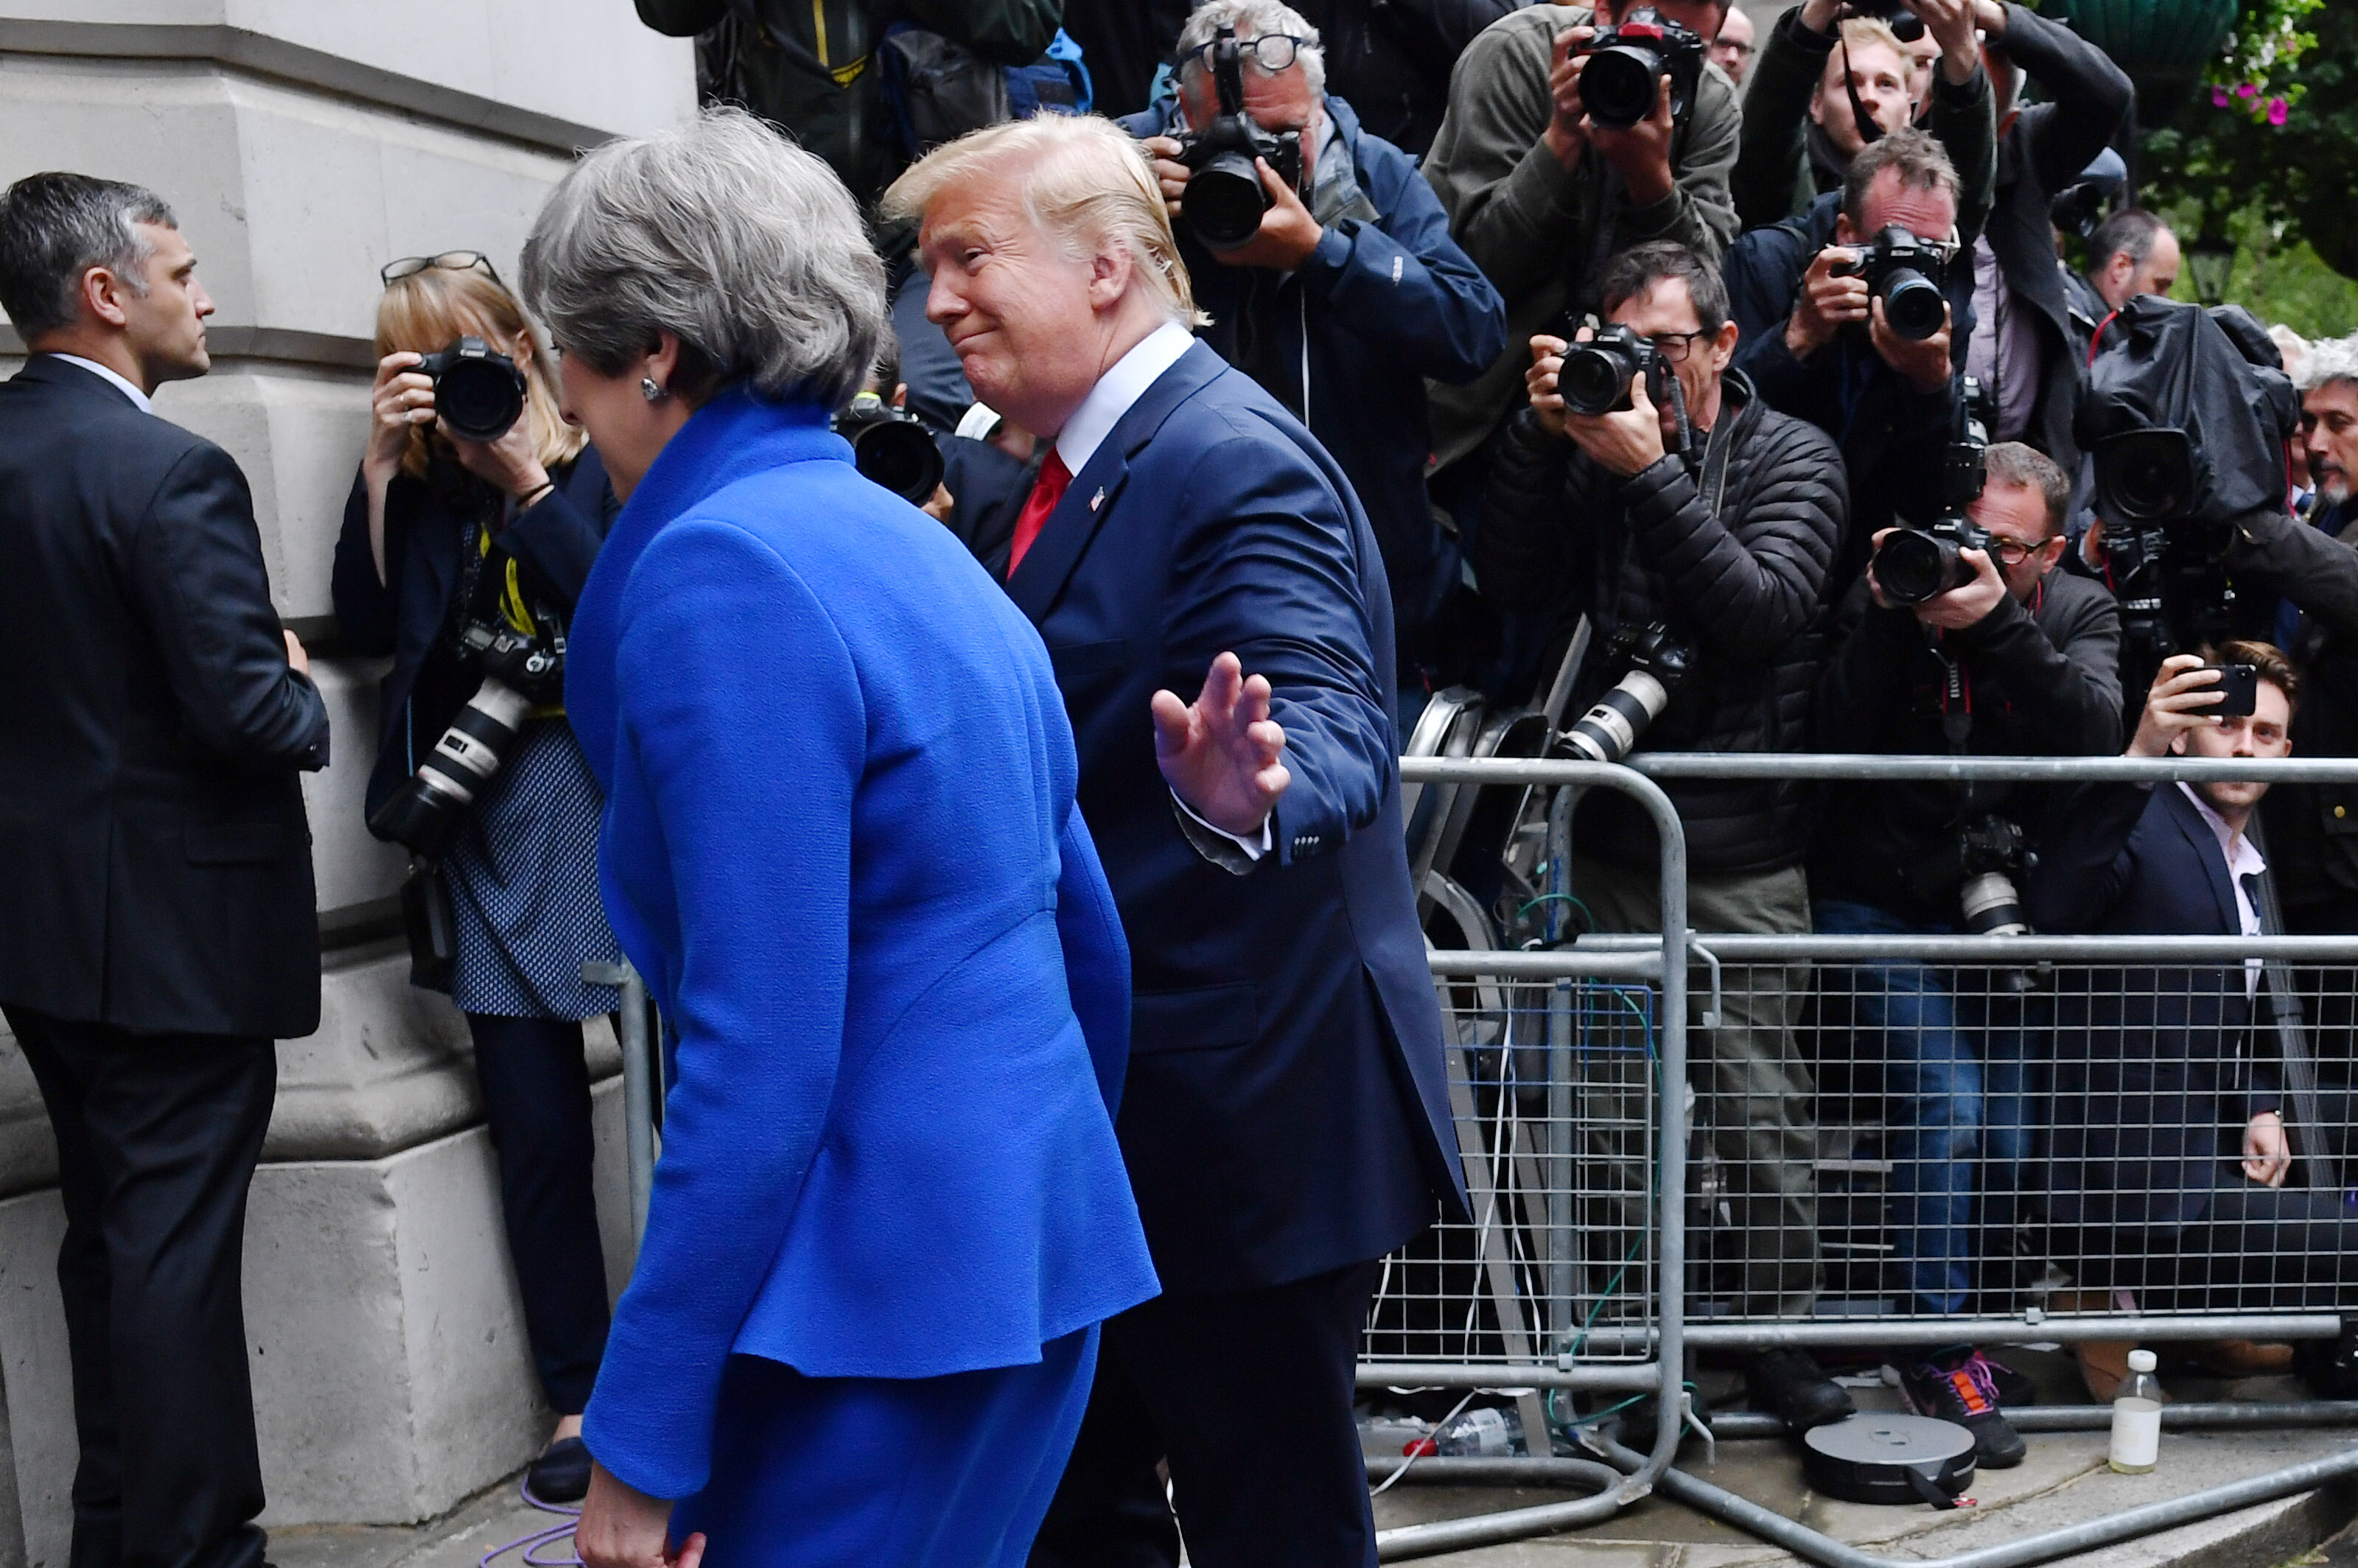 Trump and May after their press conference on Tuesday.